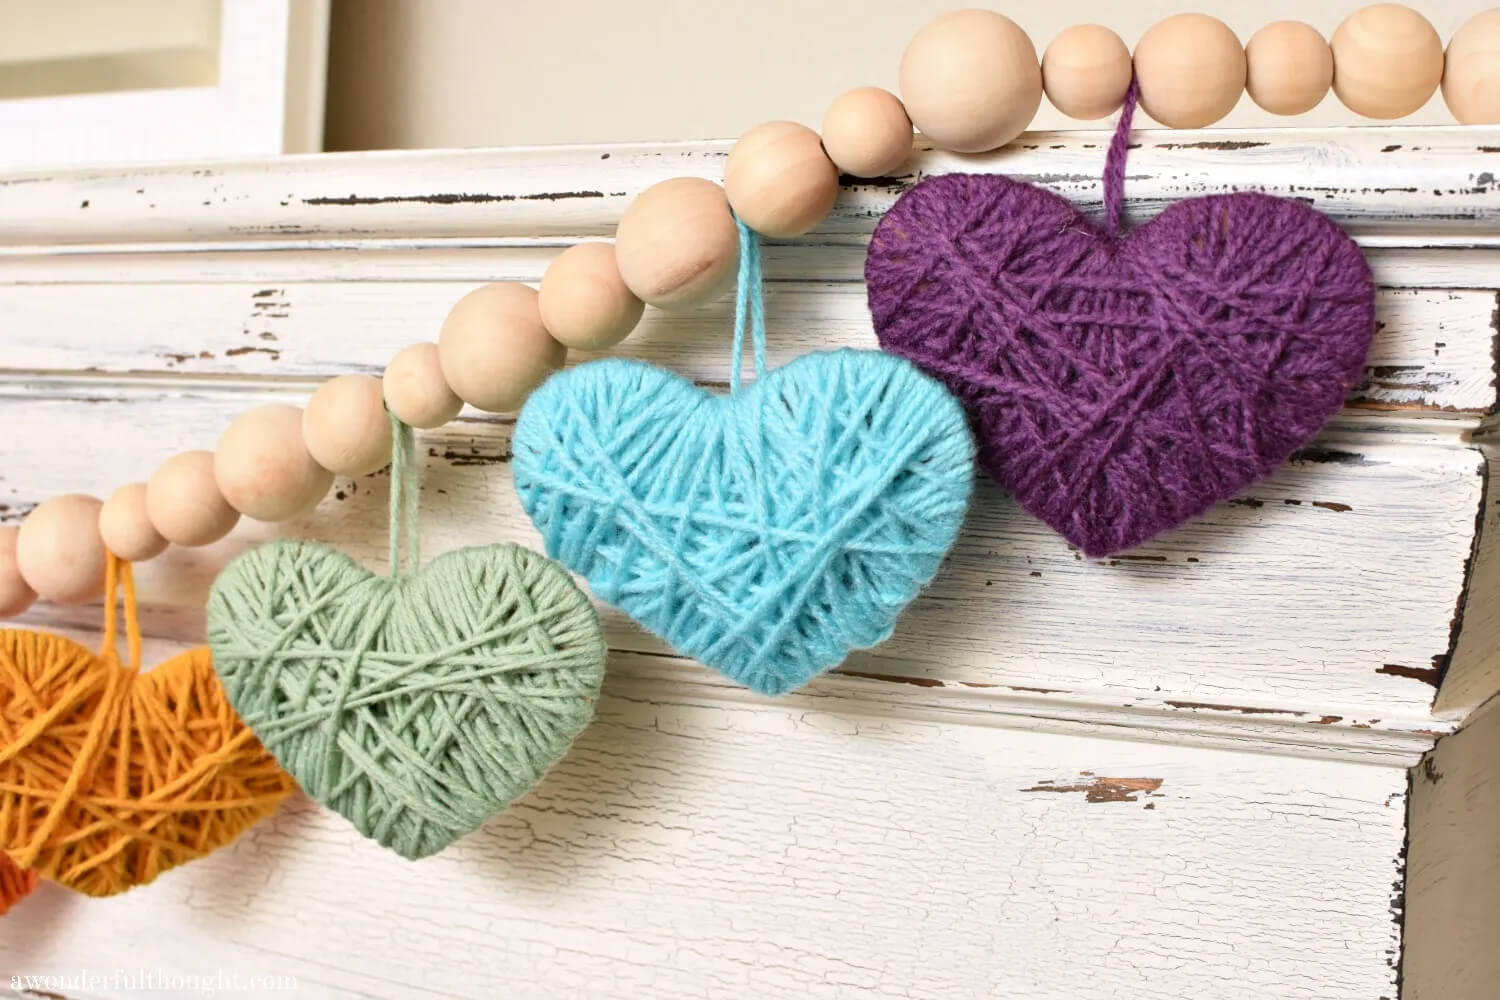 Easy-To-Make Heart-Shaped Yarn Garland Craft Idea Without Knitting